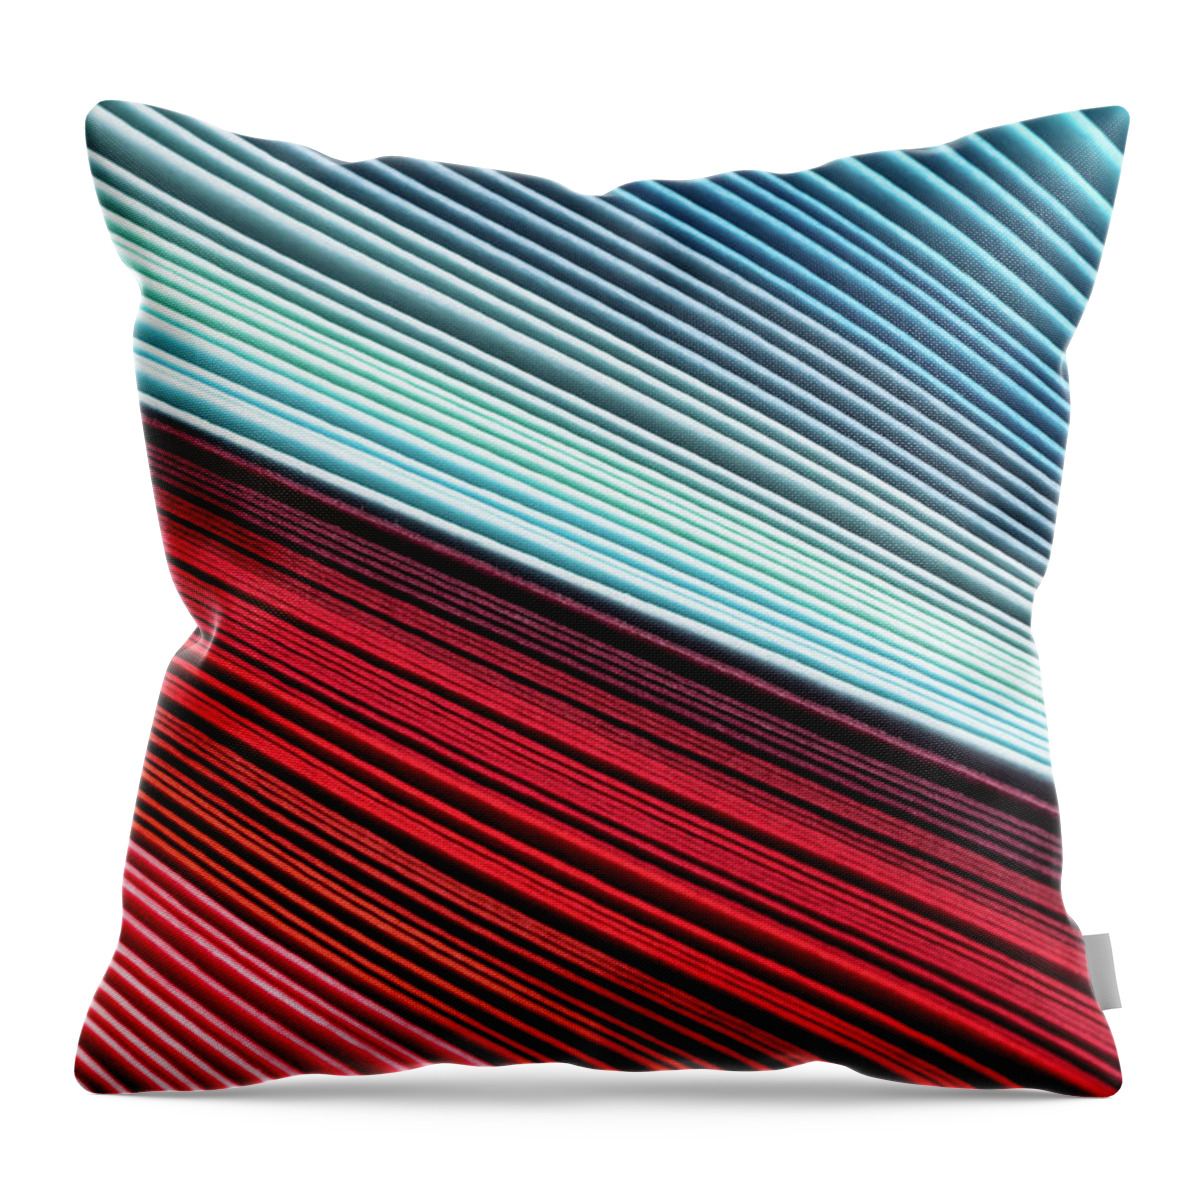 Rose Colored Throw Pillow featuring the photograph Color Contrast Of Abstract Paper Pages by Miragec